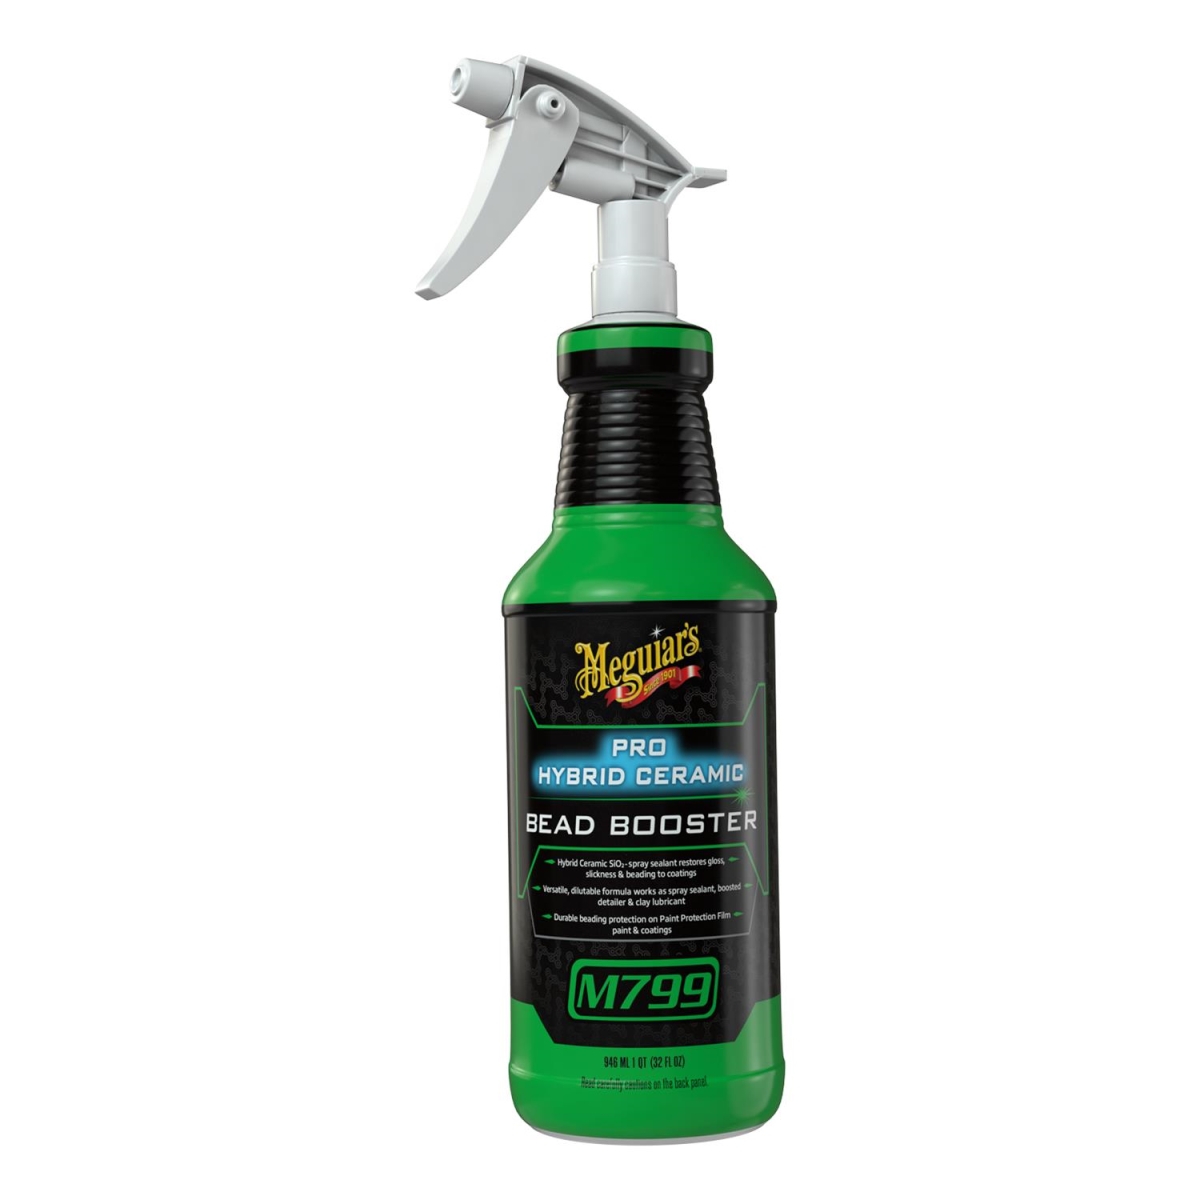 Picture of Meguiars MGM-79932 32 oz Pro Hybrid Ceramic Bead Booster